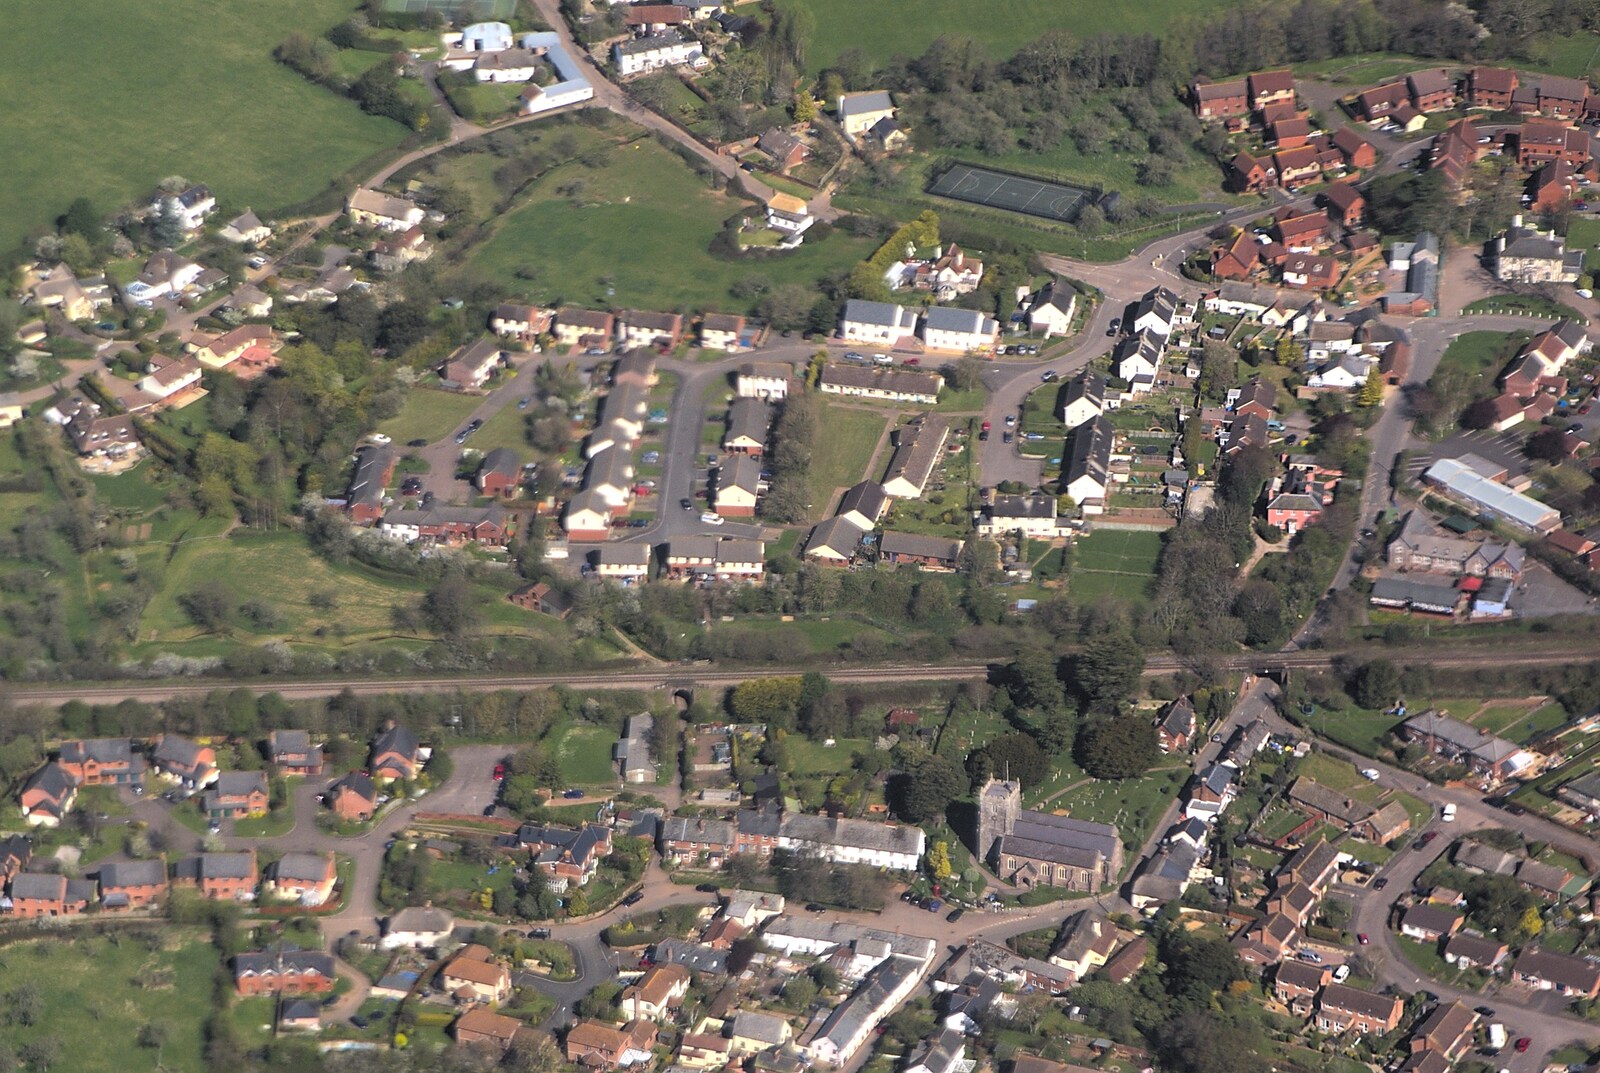 A Devon town from the air from An Easter Weekend in Chagford, Devon - 12th April 2009